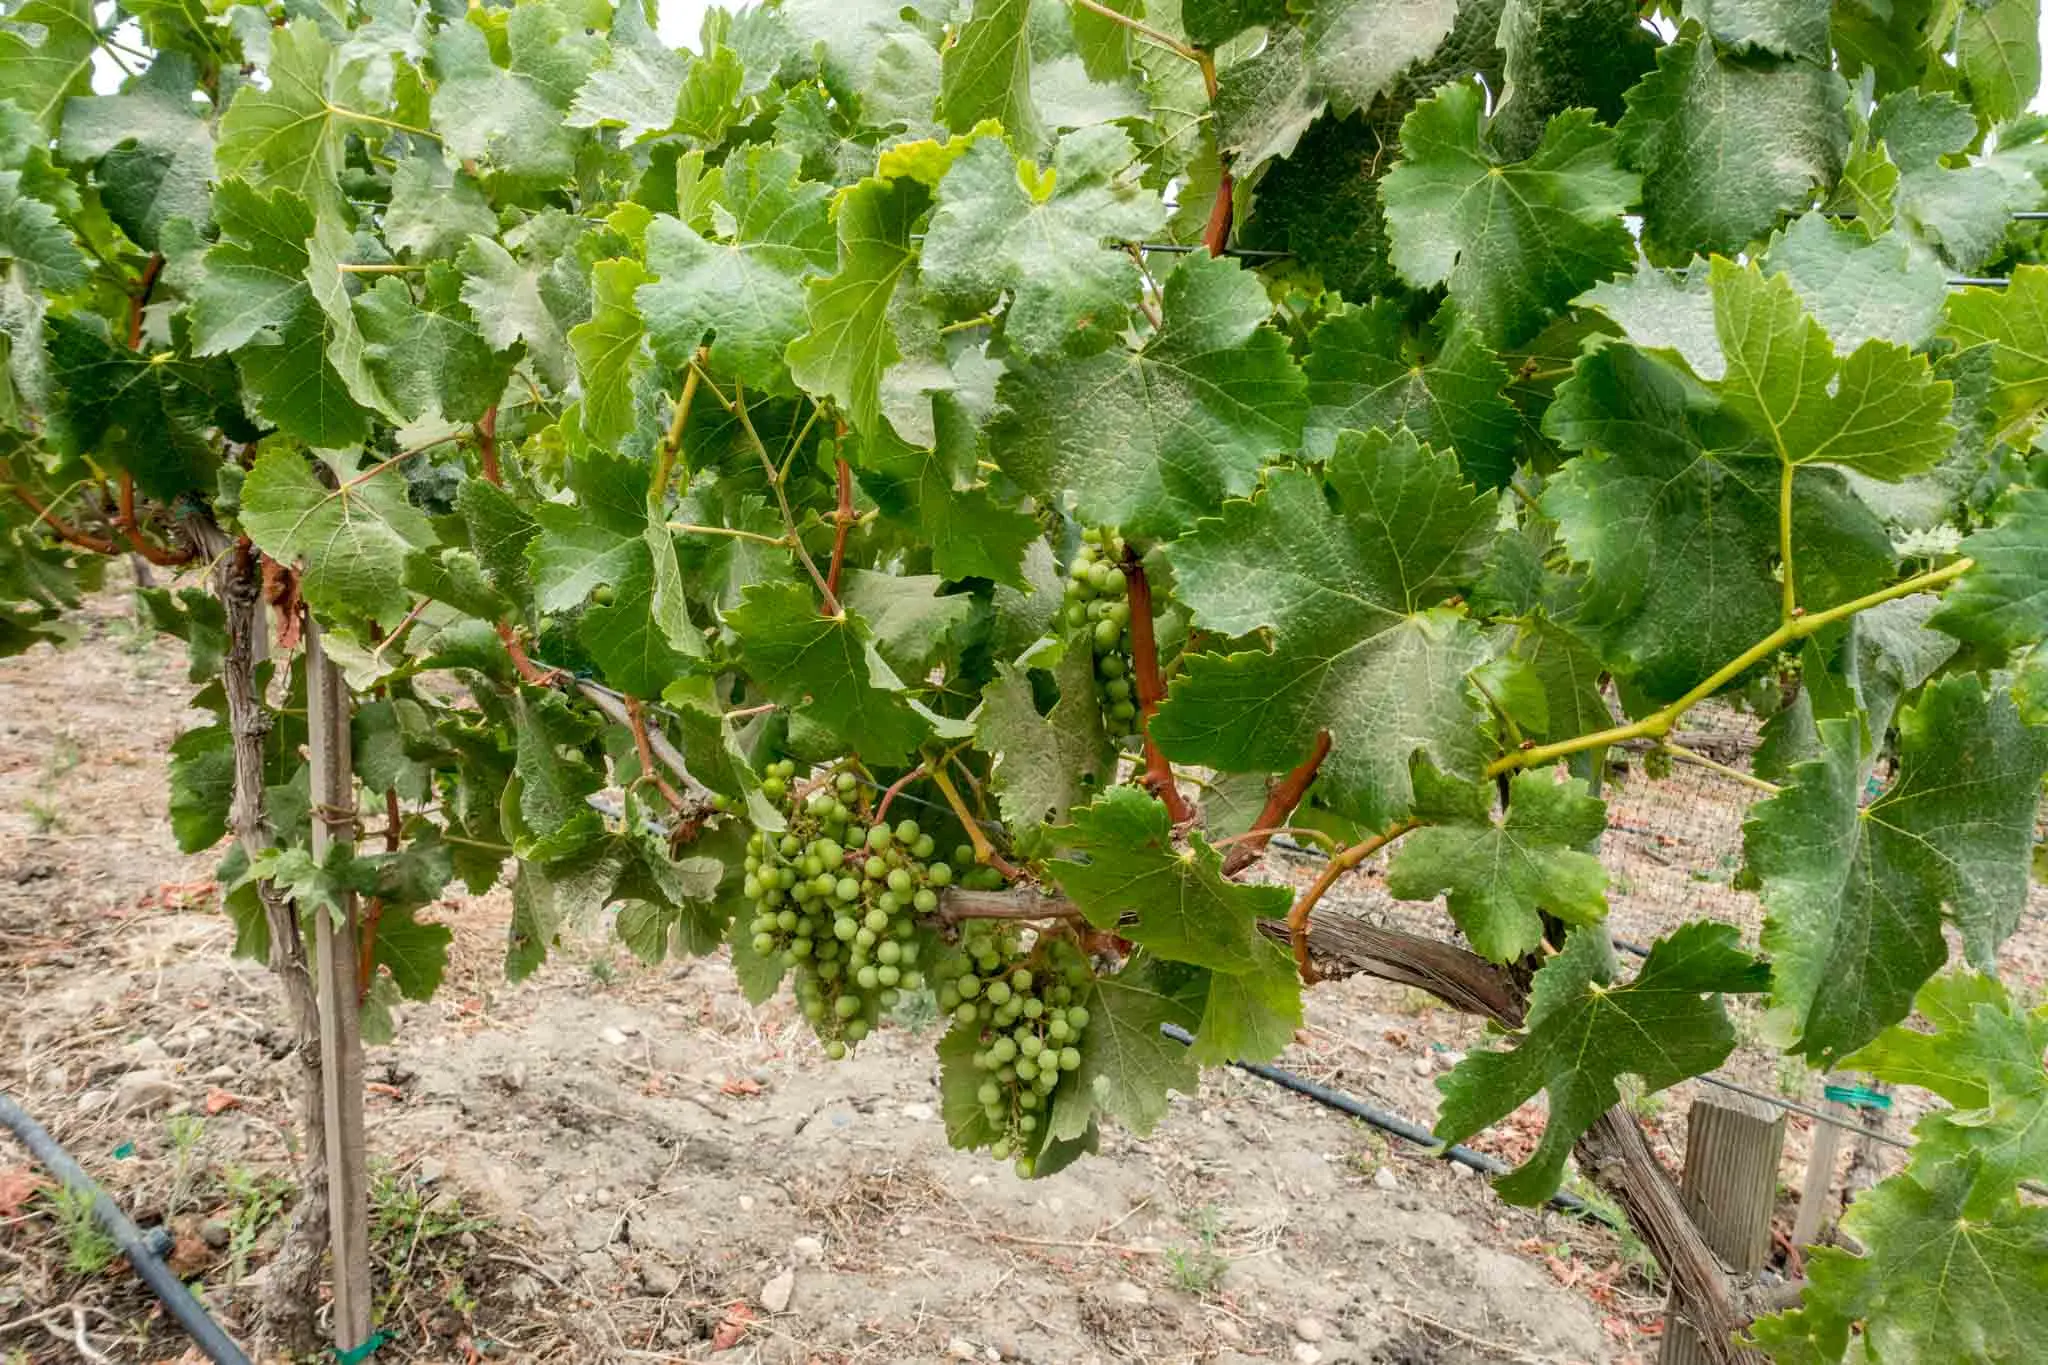 Grapes on a vine at a vineyard